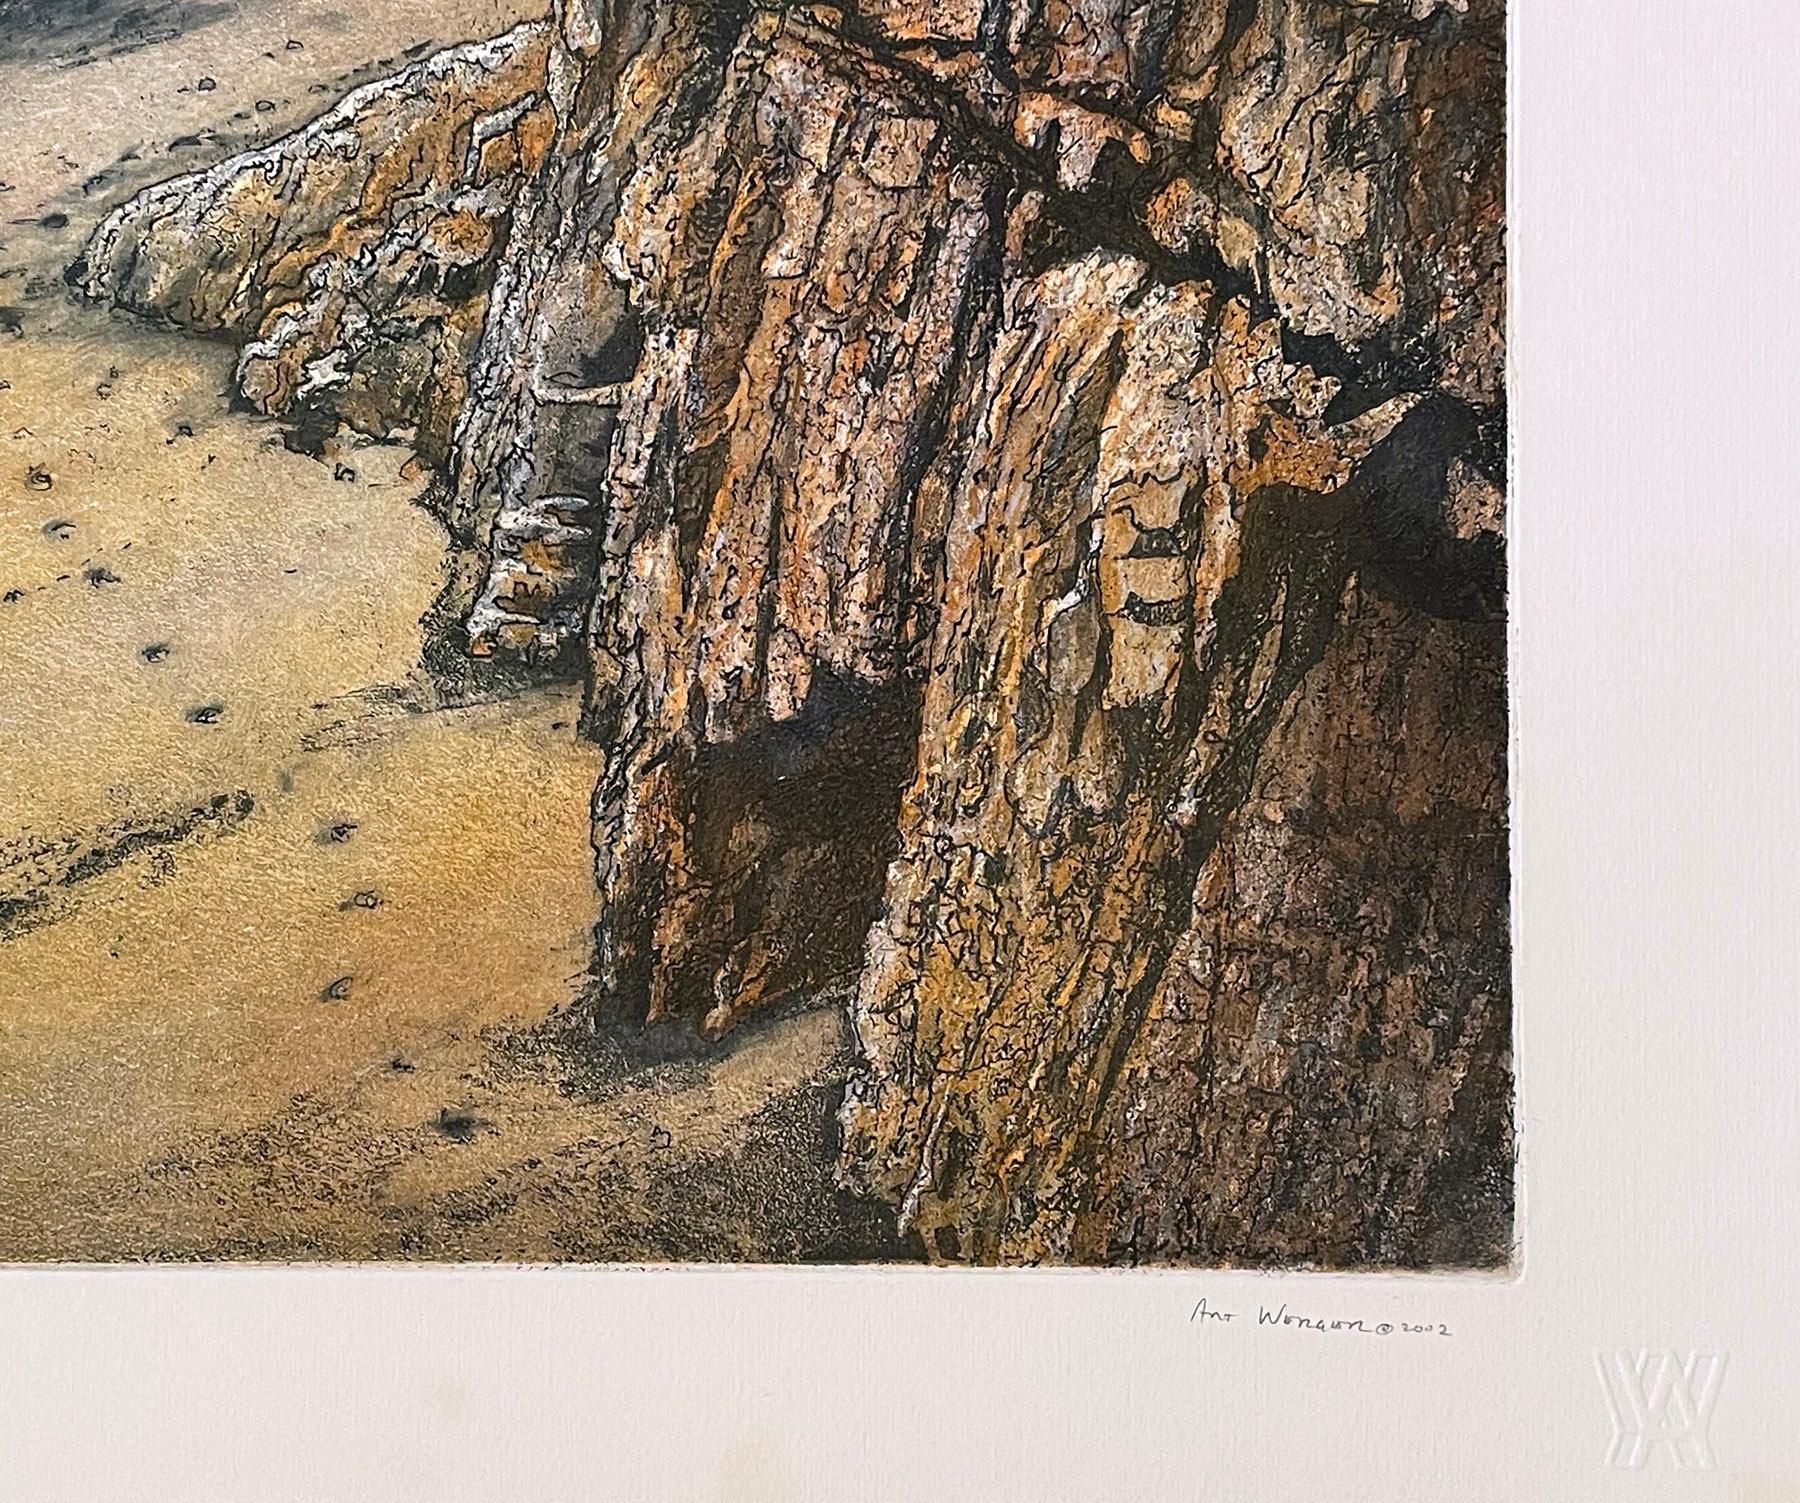 Signed, titled and numbered from the edition of 25. This is the center image in the triptych of  prints titled Memory and Presence. Werger created this image of the California coastline, including part of the seascape, the cliff, and the pathway